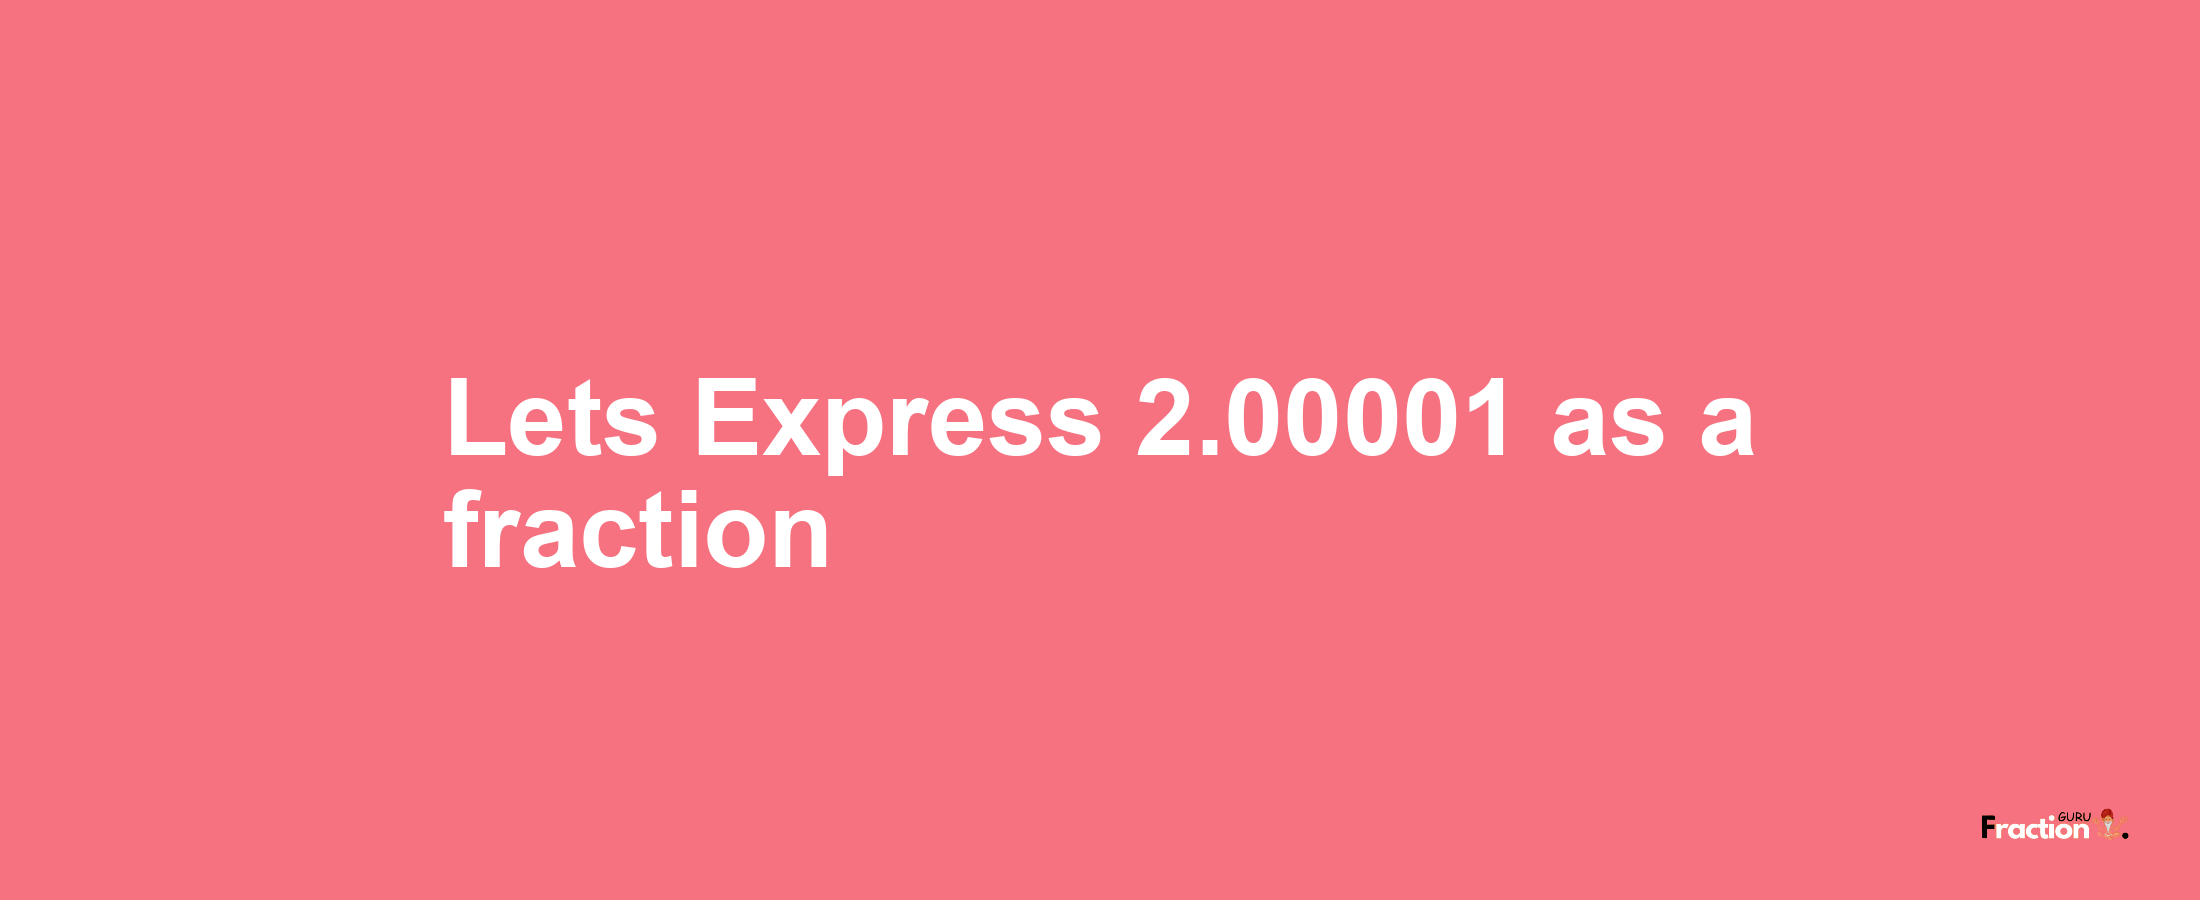 Lets Express 2.00001 as afraction